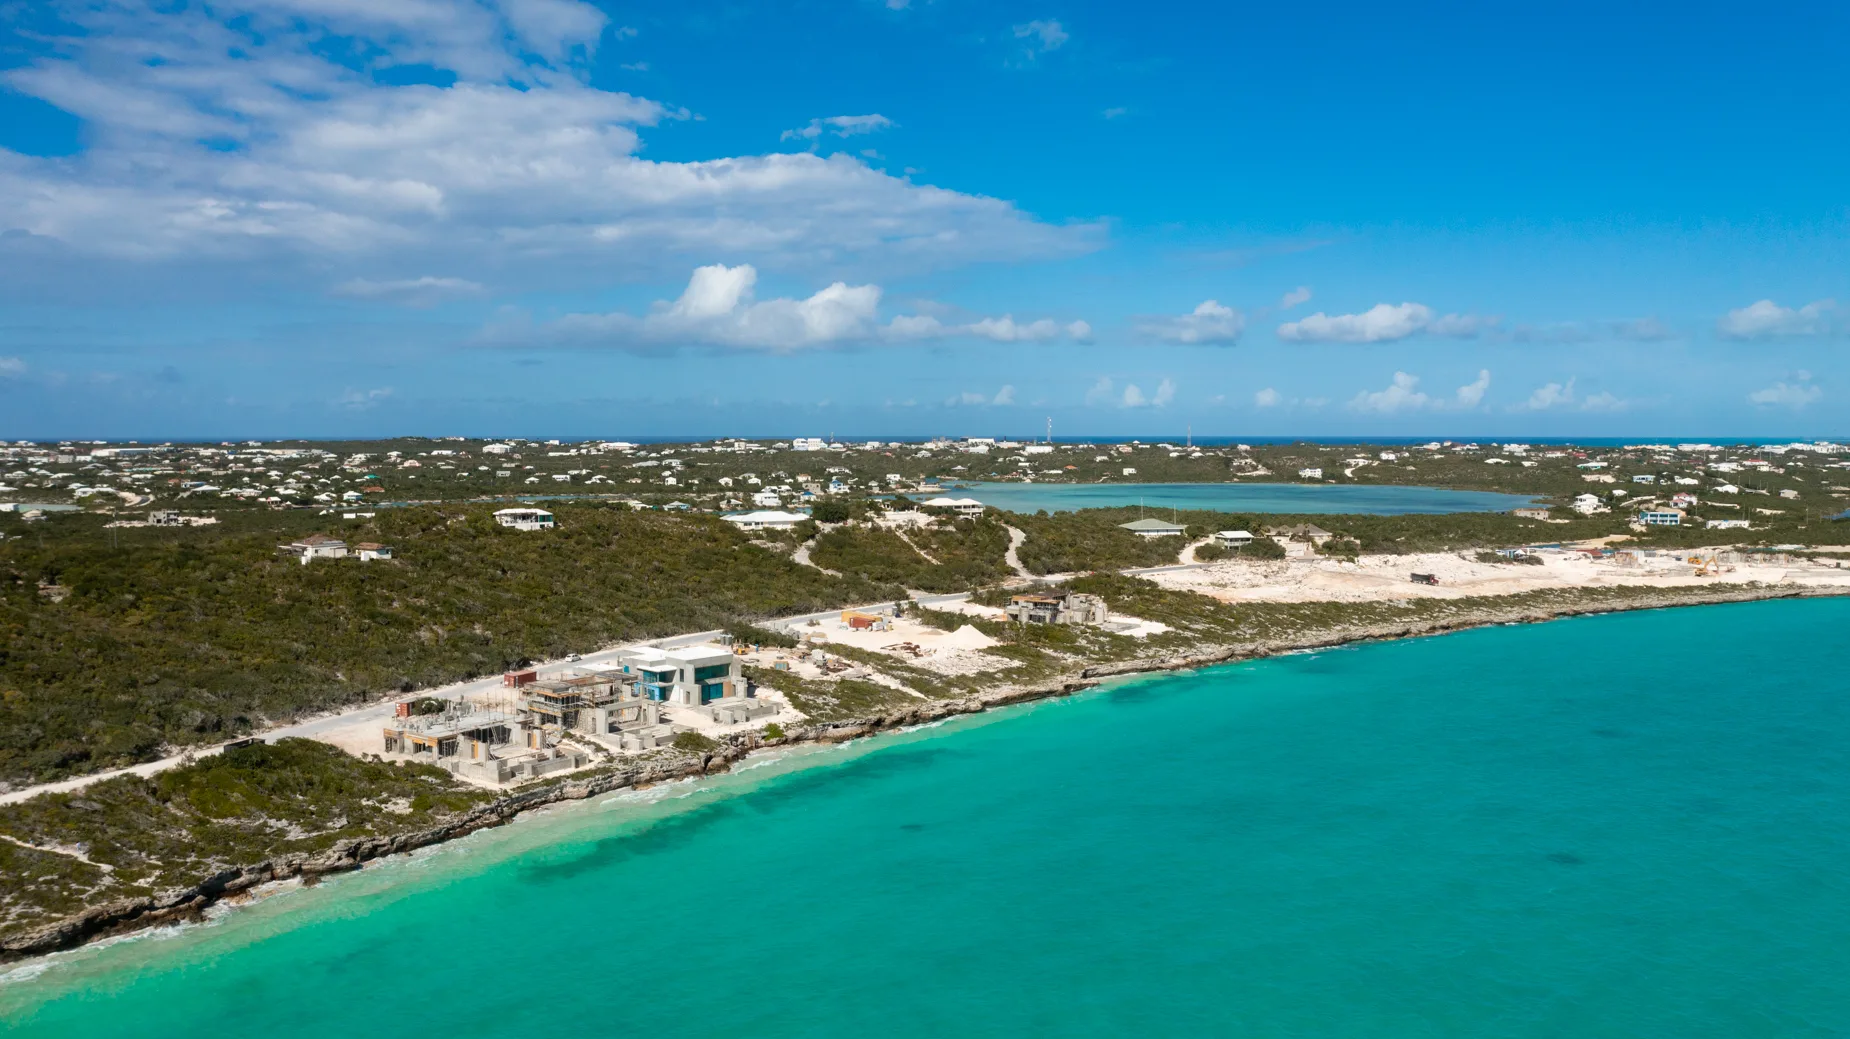 wide shot of shoreline and Coast of Cooper Jack Bay depicting The Strand's Luxury Residences making incredible strides